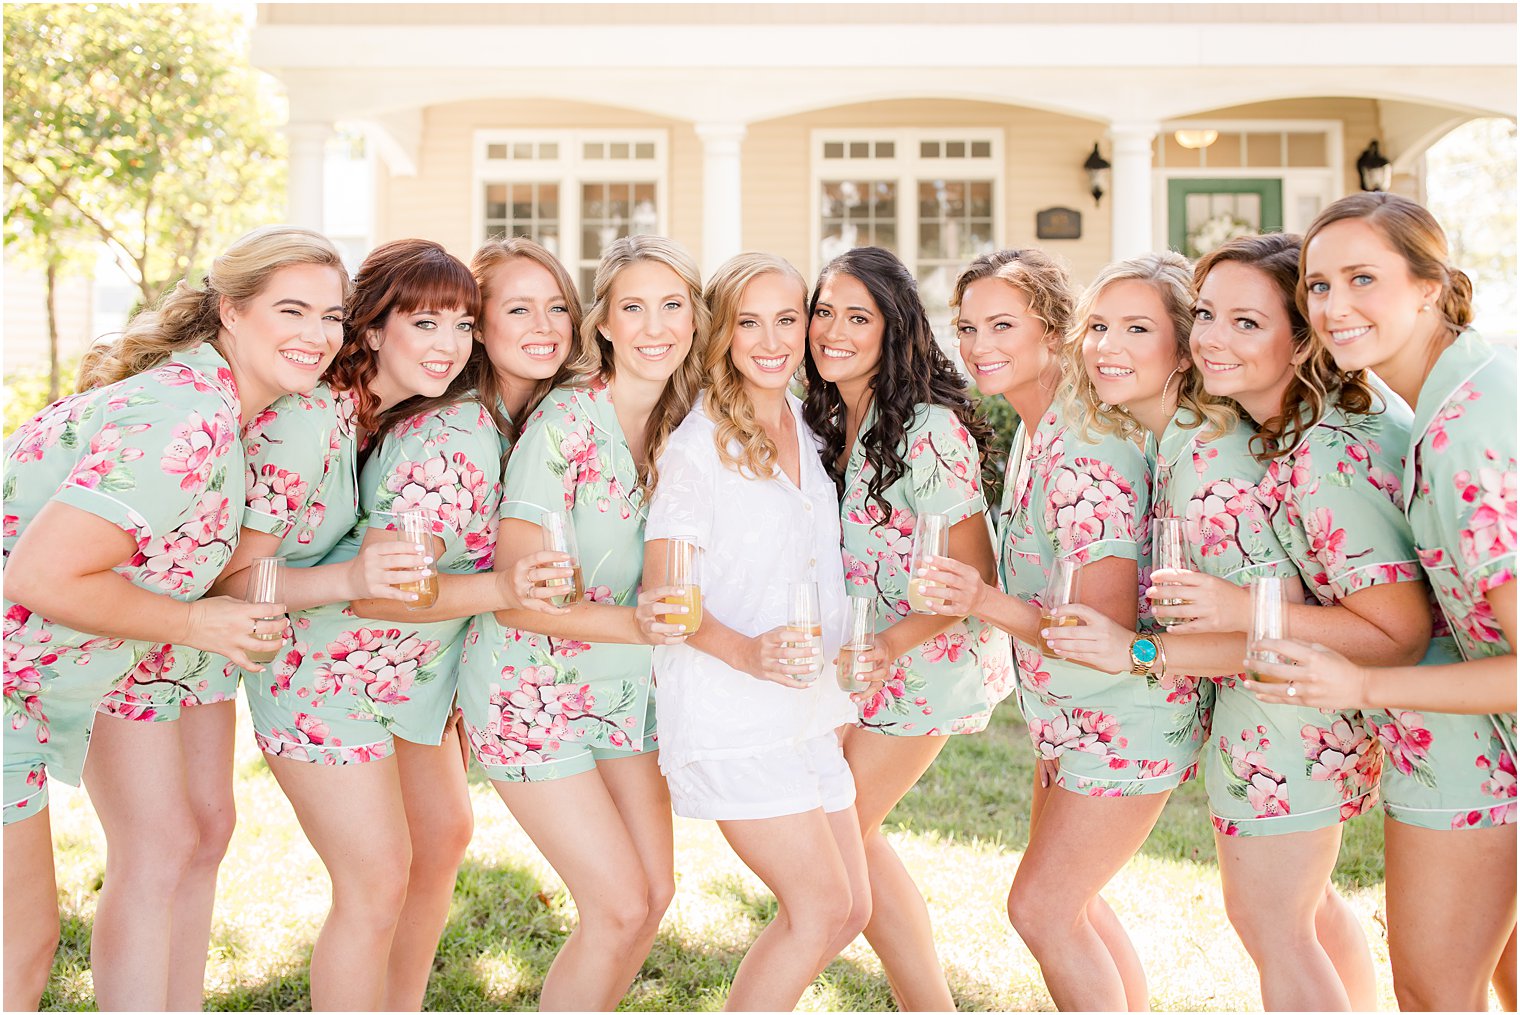 getting ready ideas for bridal party on wedding day